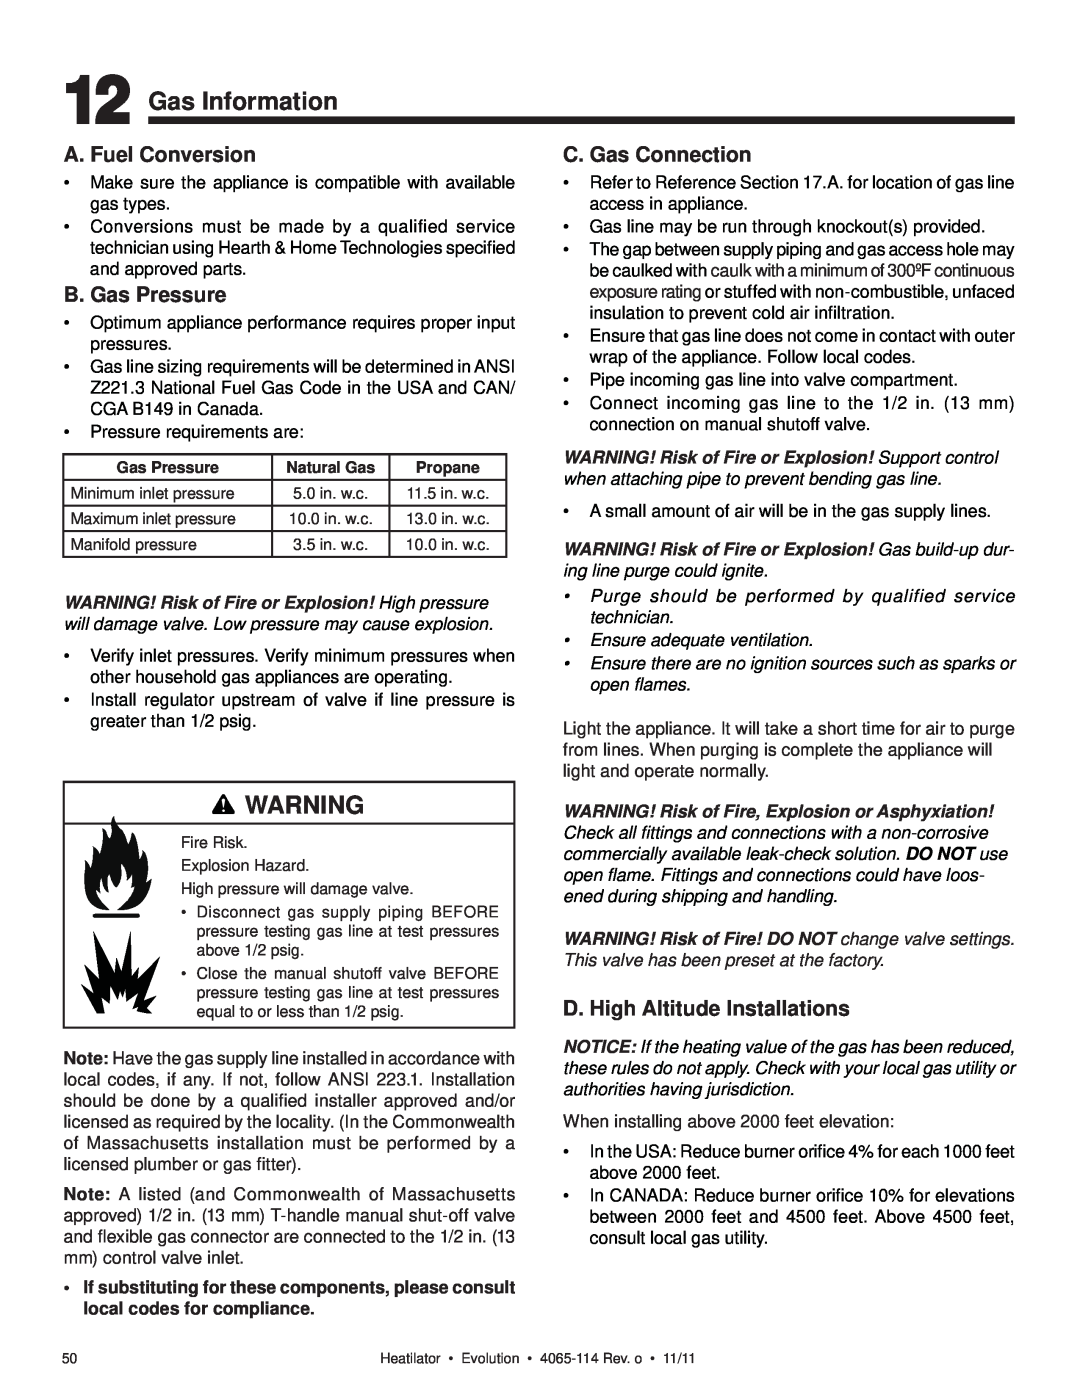 Heatiator NEVO4236I NEVO3630I owner manual Gas Information, A. Fuel Conversion, B. Gas Pressure, C. Gas Connection 